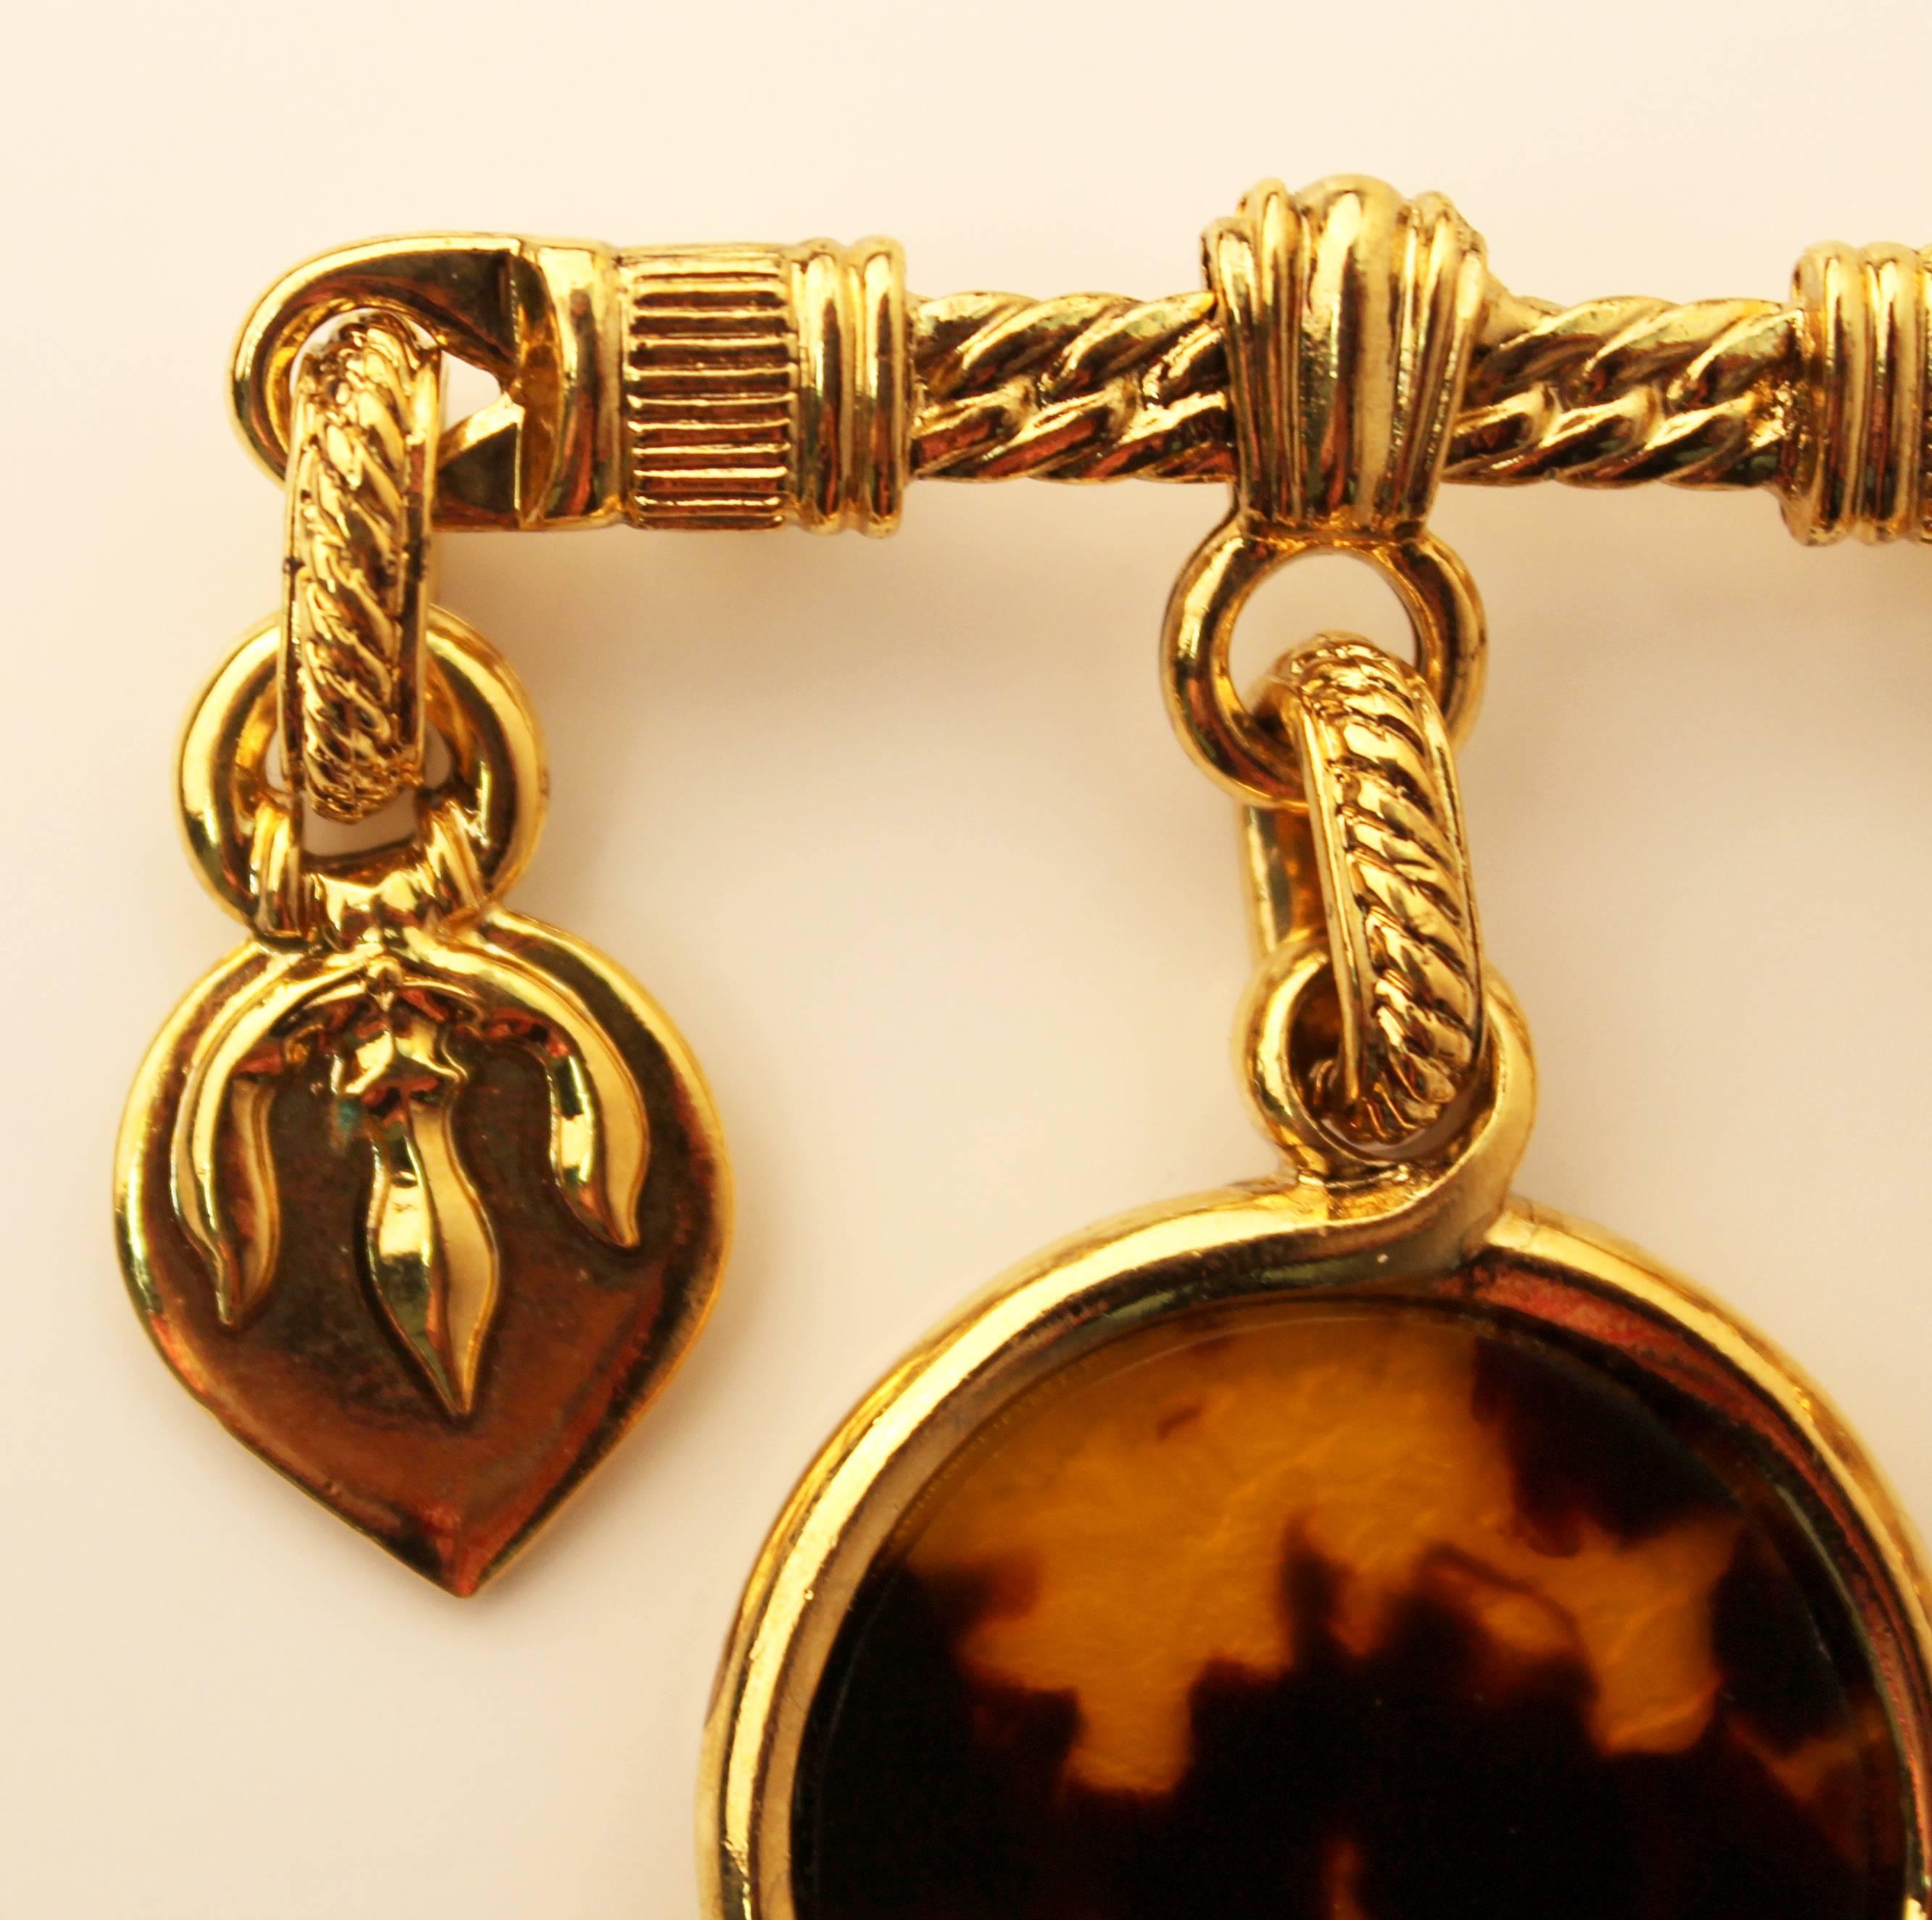 Very rare and unique vintage gold-plated brooch from Yves Saint Laurent. Features two small hanging charms on either side (one featuring a trident) and a larger tortoise shell charm in the middle. Estimated to be from before 1990.